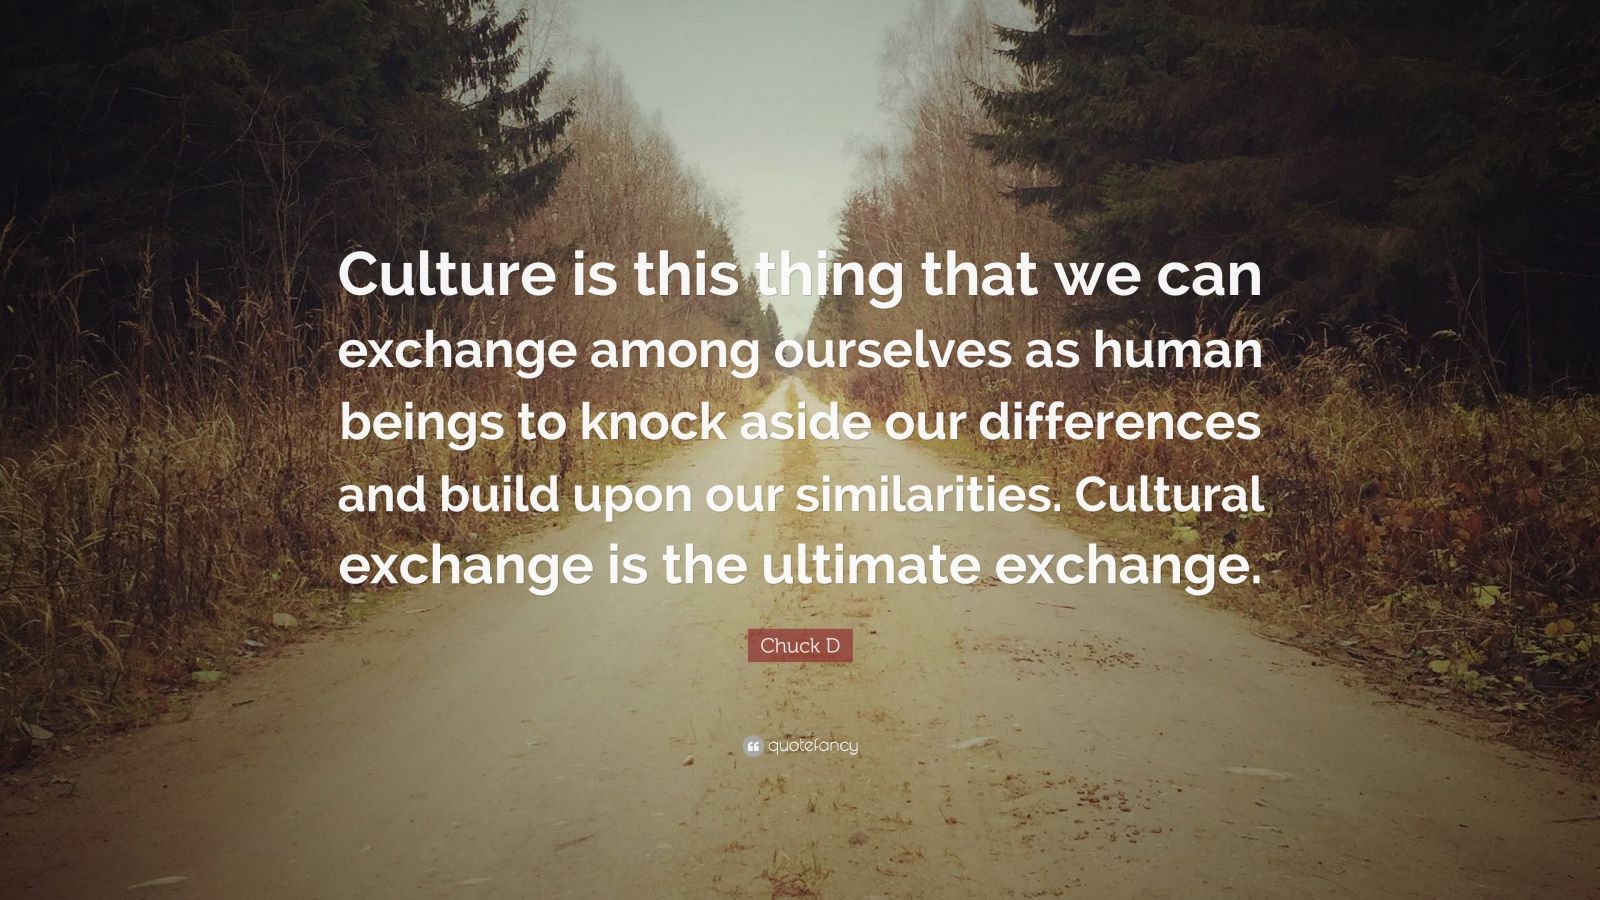 Chuck D Quote: “Culture is this thing that we can exchange among